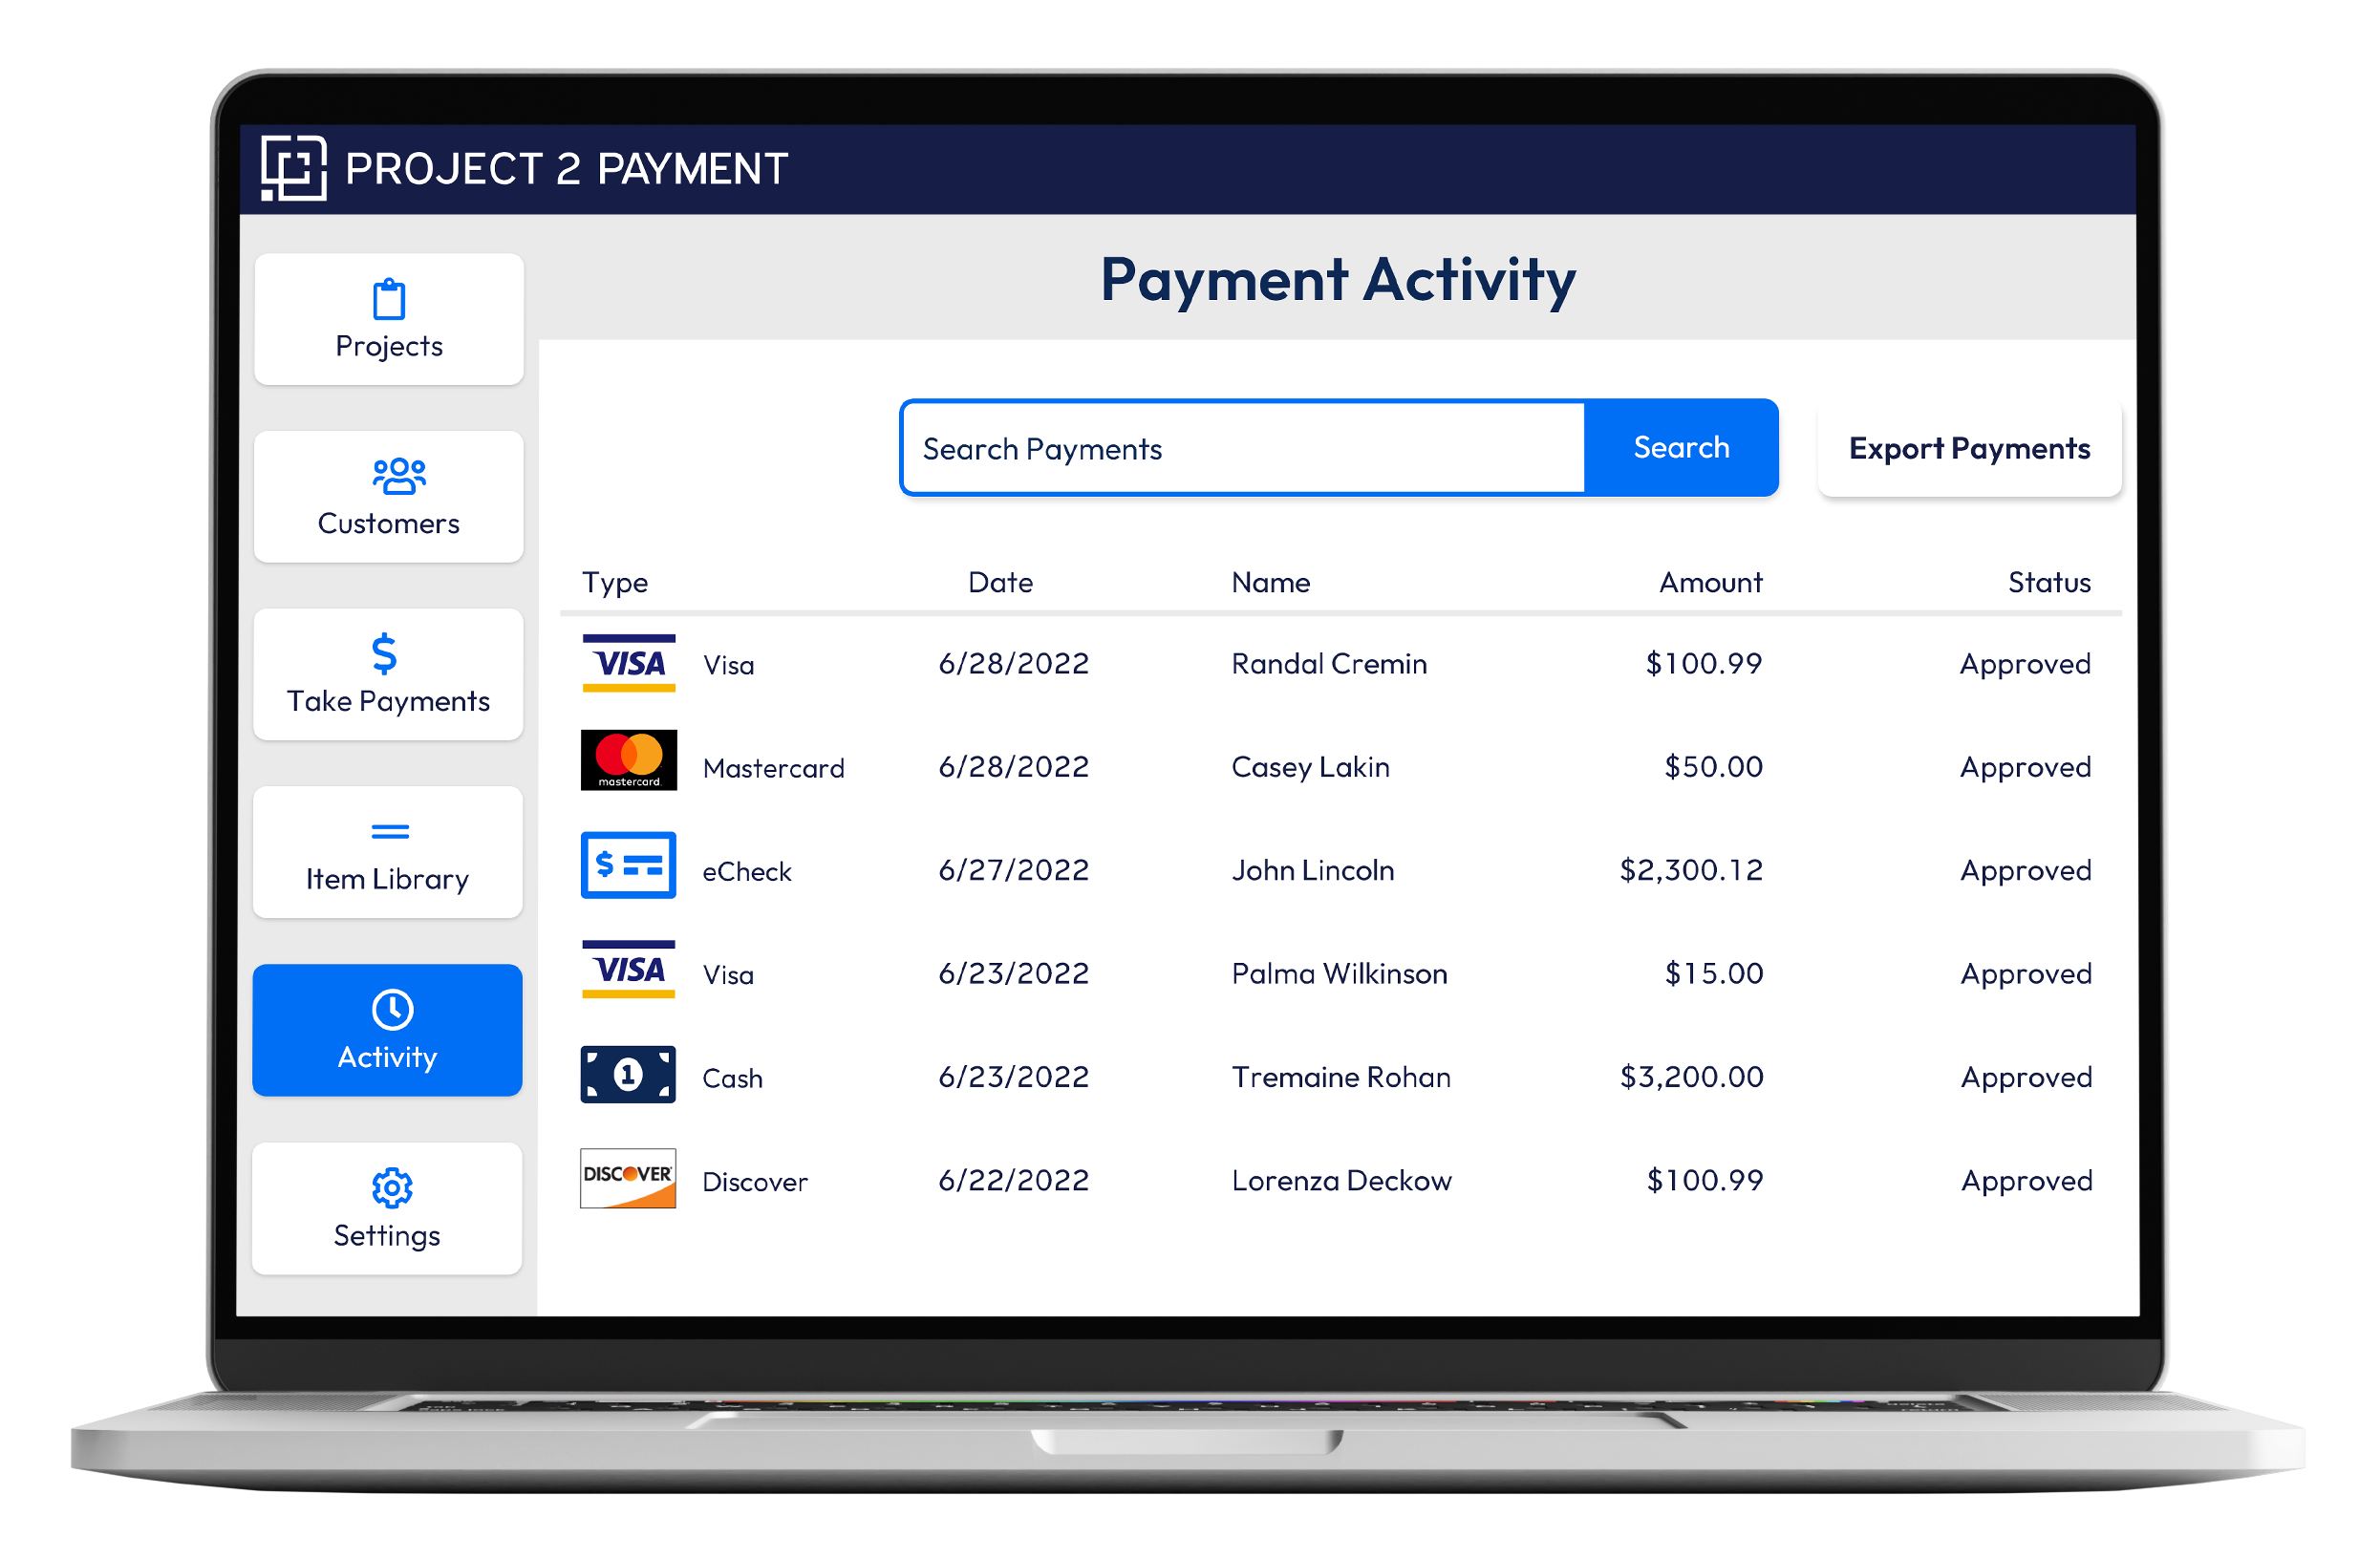 With Project 2 Payment, see payment, project status, and keep an eye on your business' cash flow.